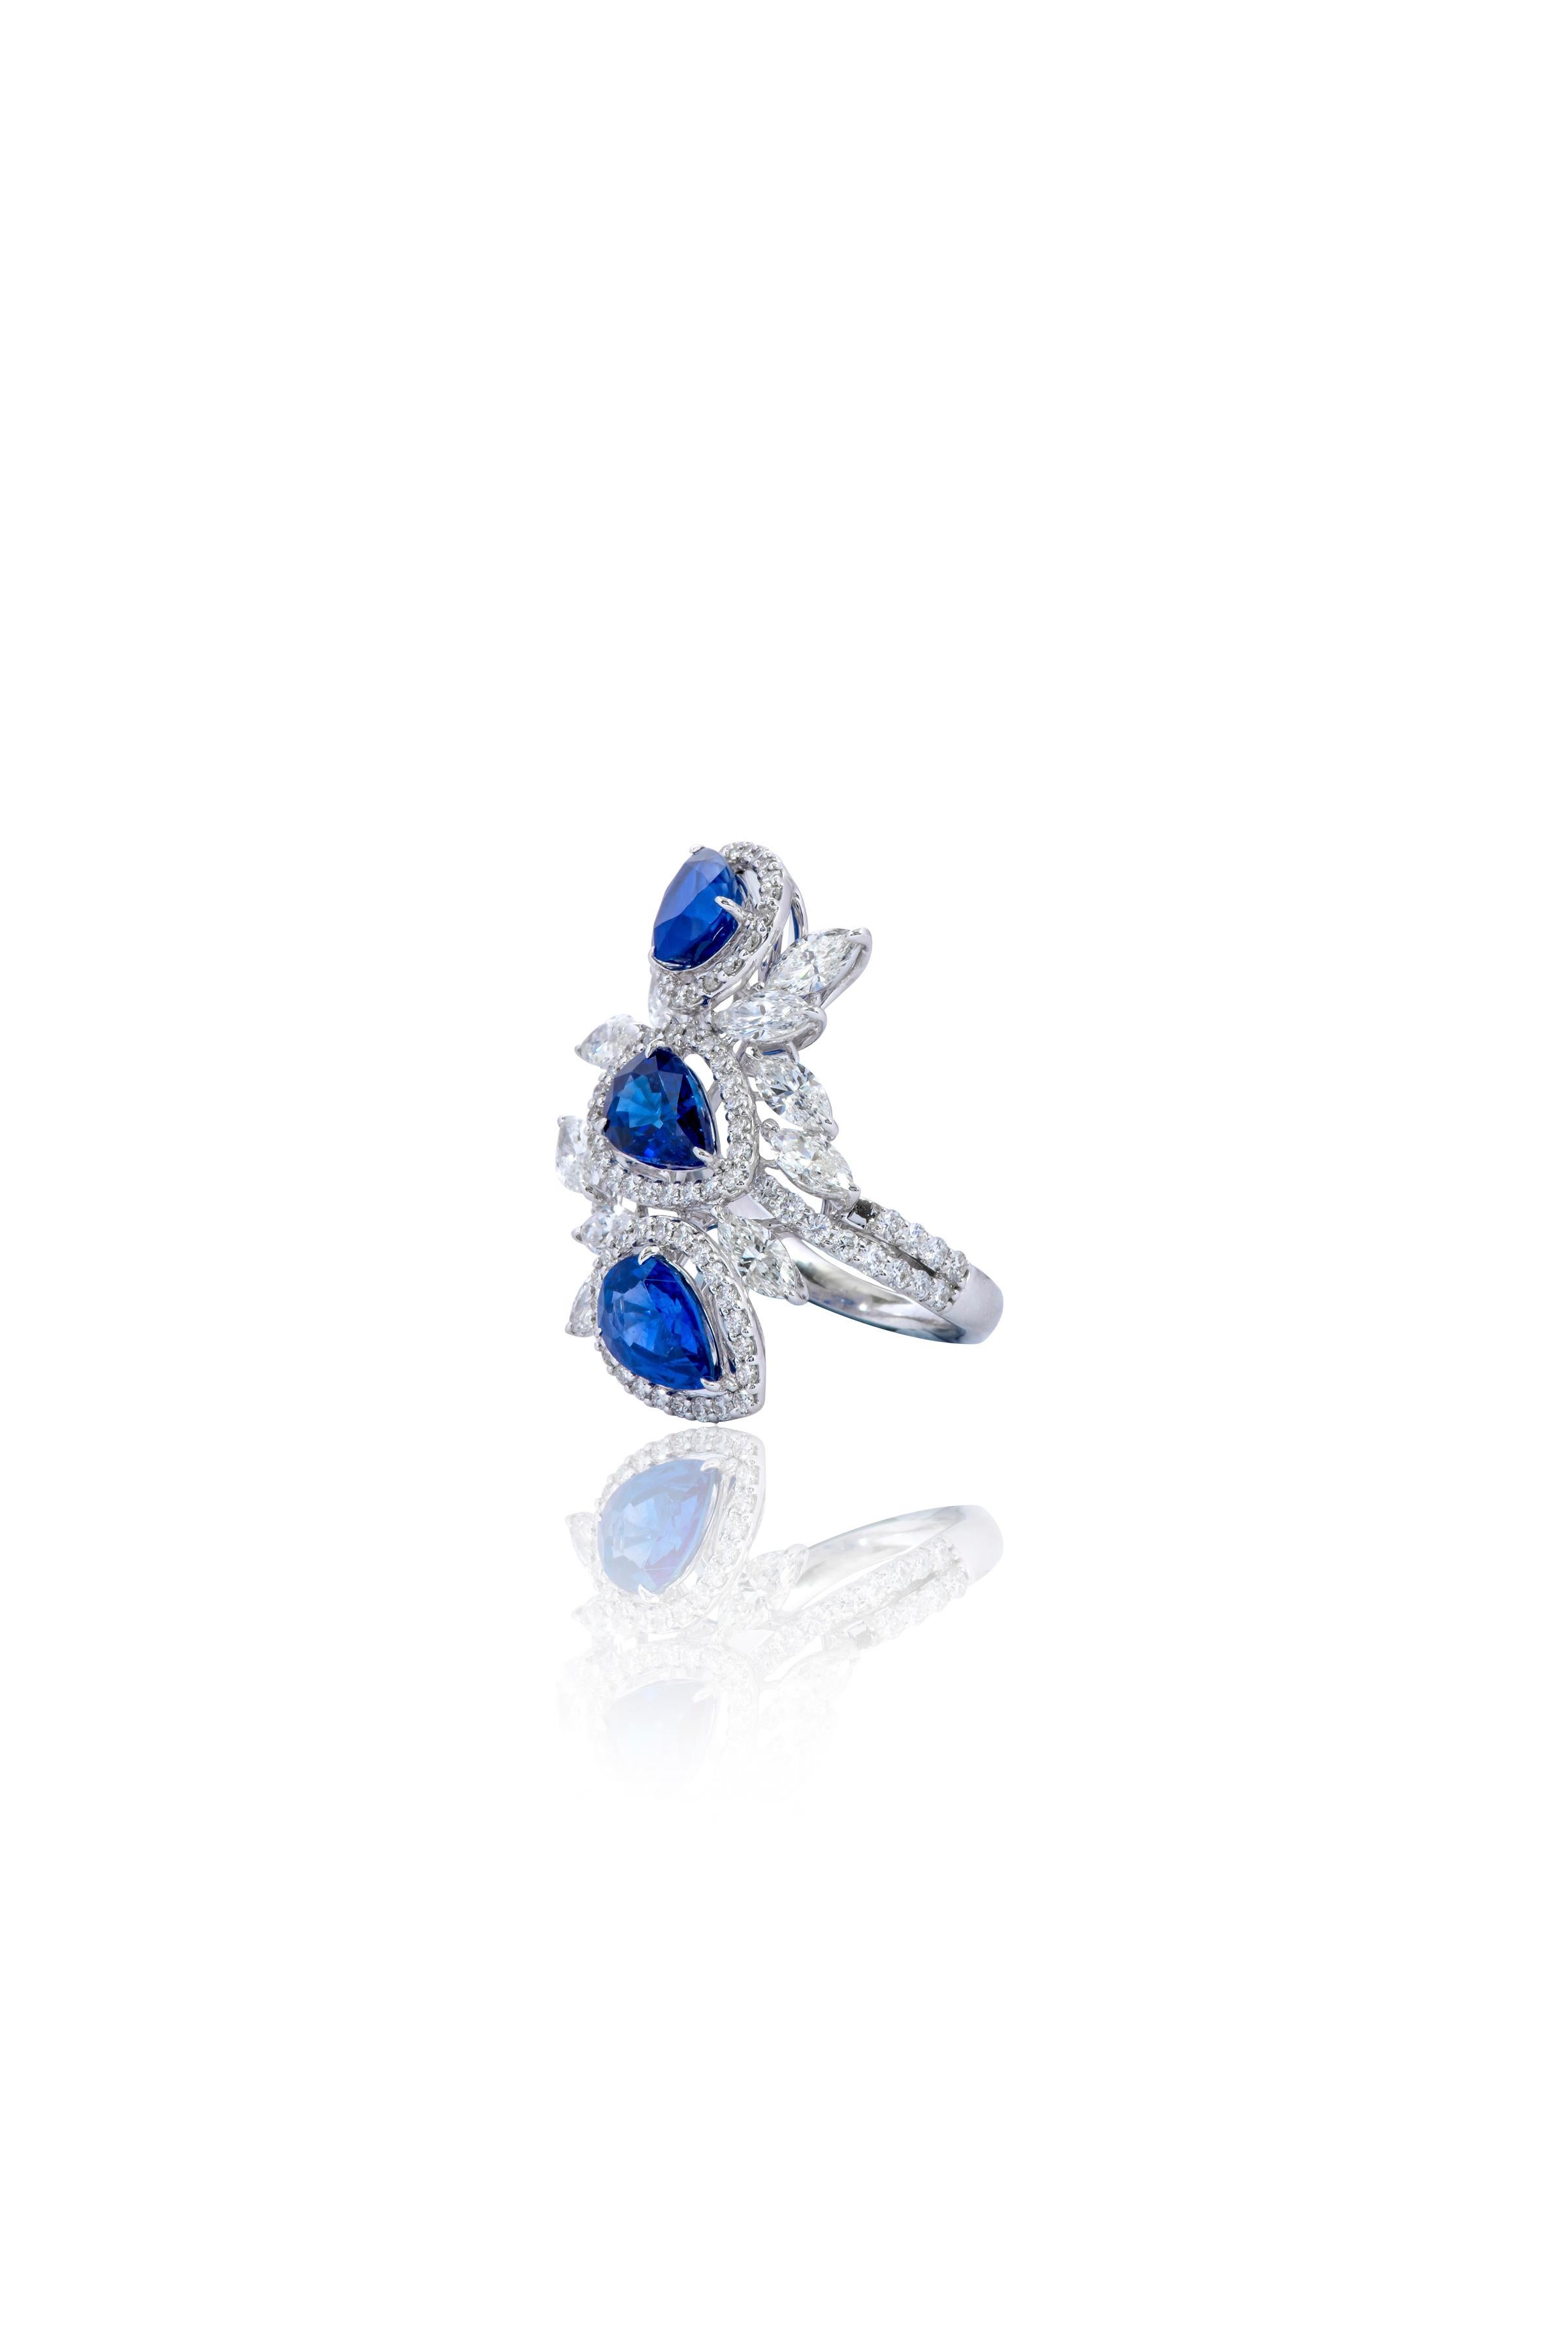 18 Karat White Gold 5.43 Carat Sapphire and Diamond Cocktail Ring 

The cocktail trapezoid blue sapphire pear ring is a masterful design. The blooming floral leaves inspire the ring, as they transcend with the changing season. The royal hue of blue